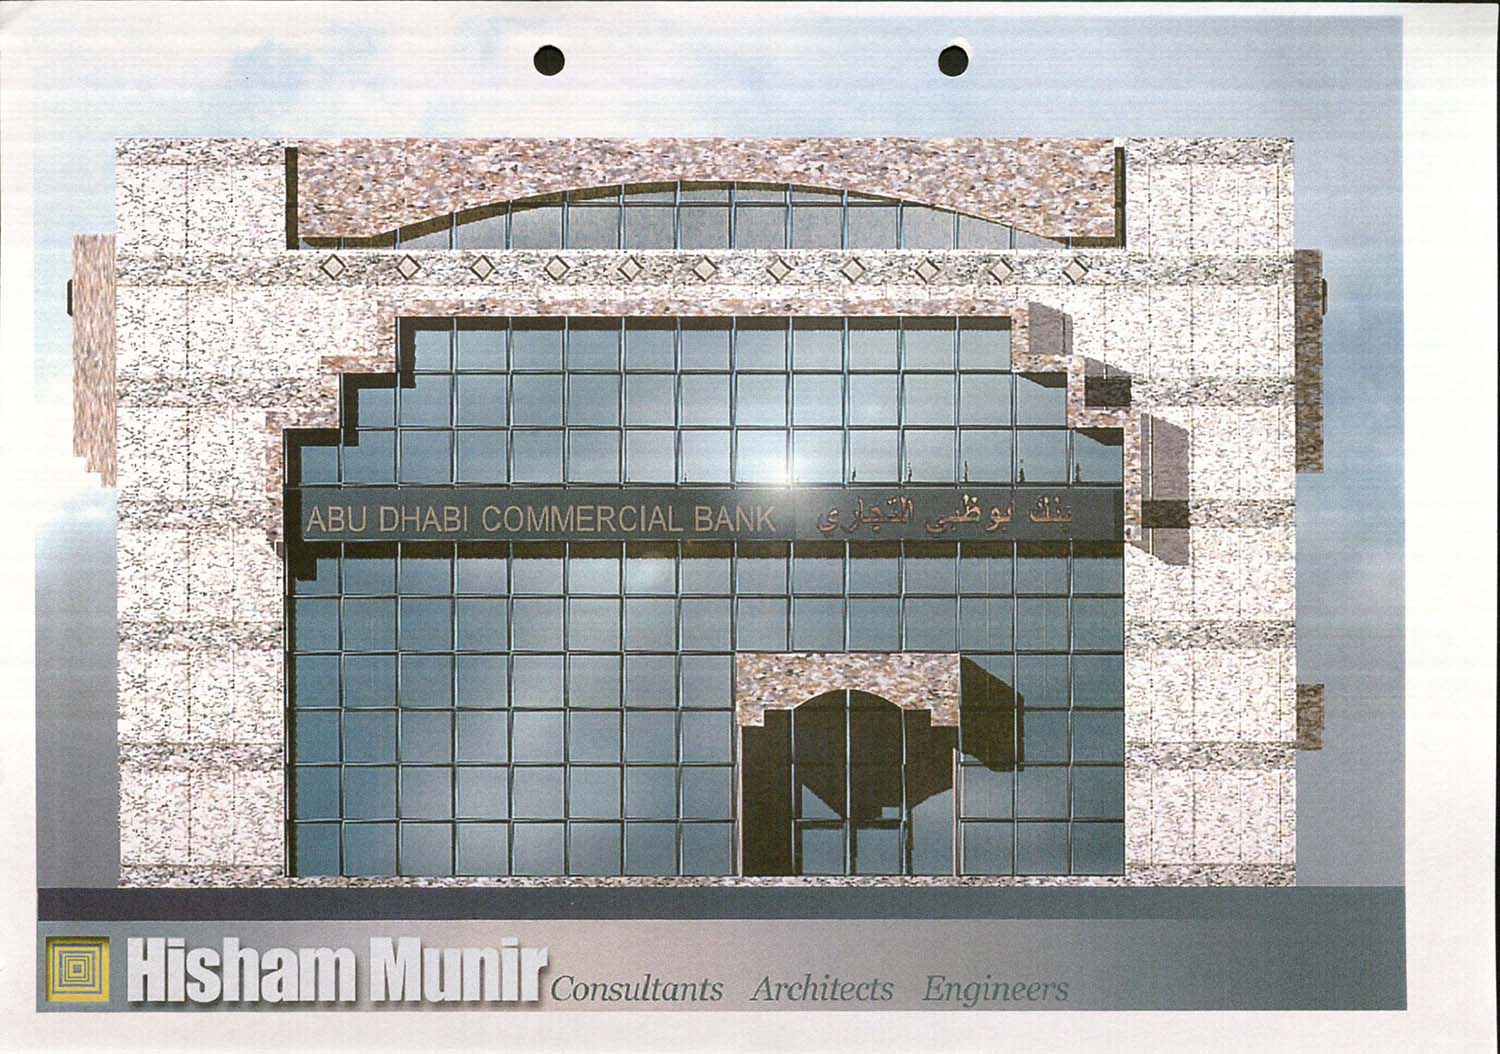 Architectural rendering of the bank's facade with the logo of the architectural firm.